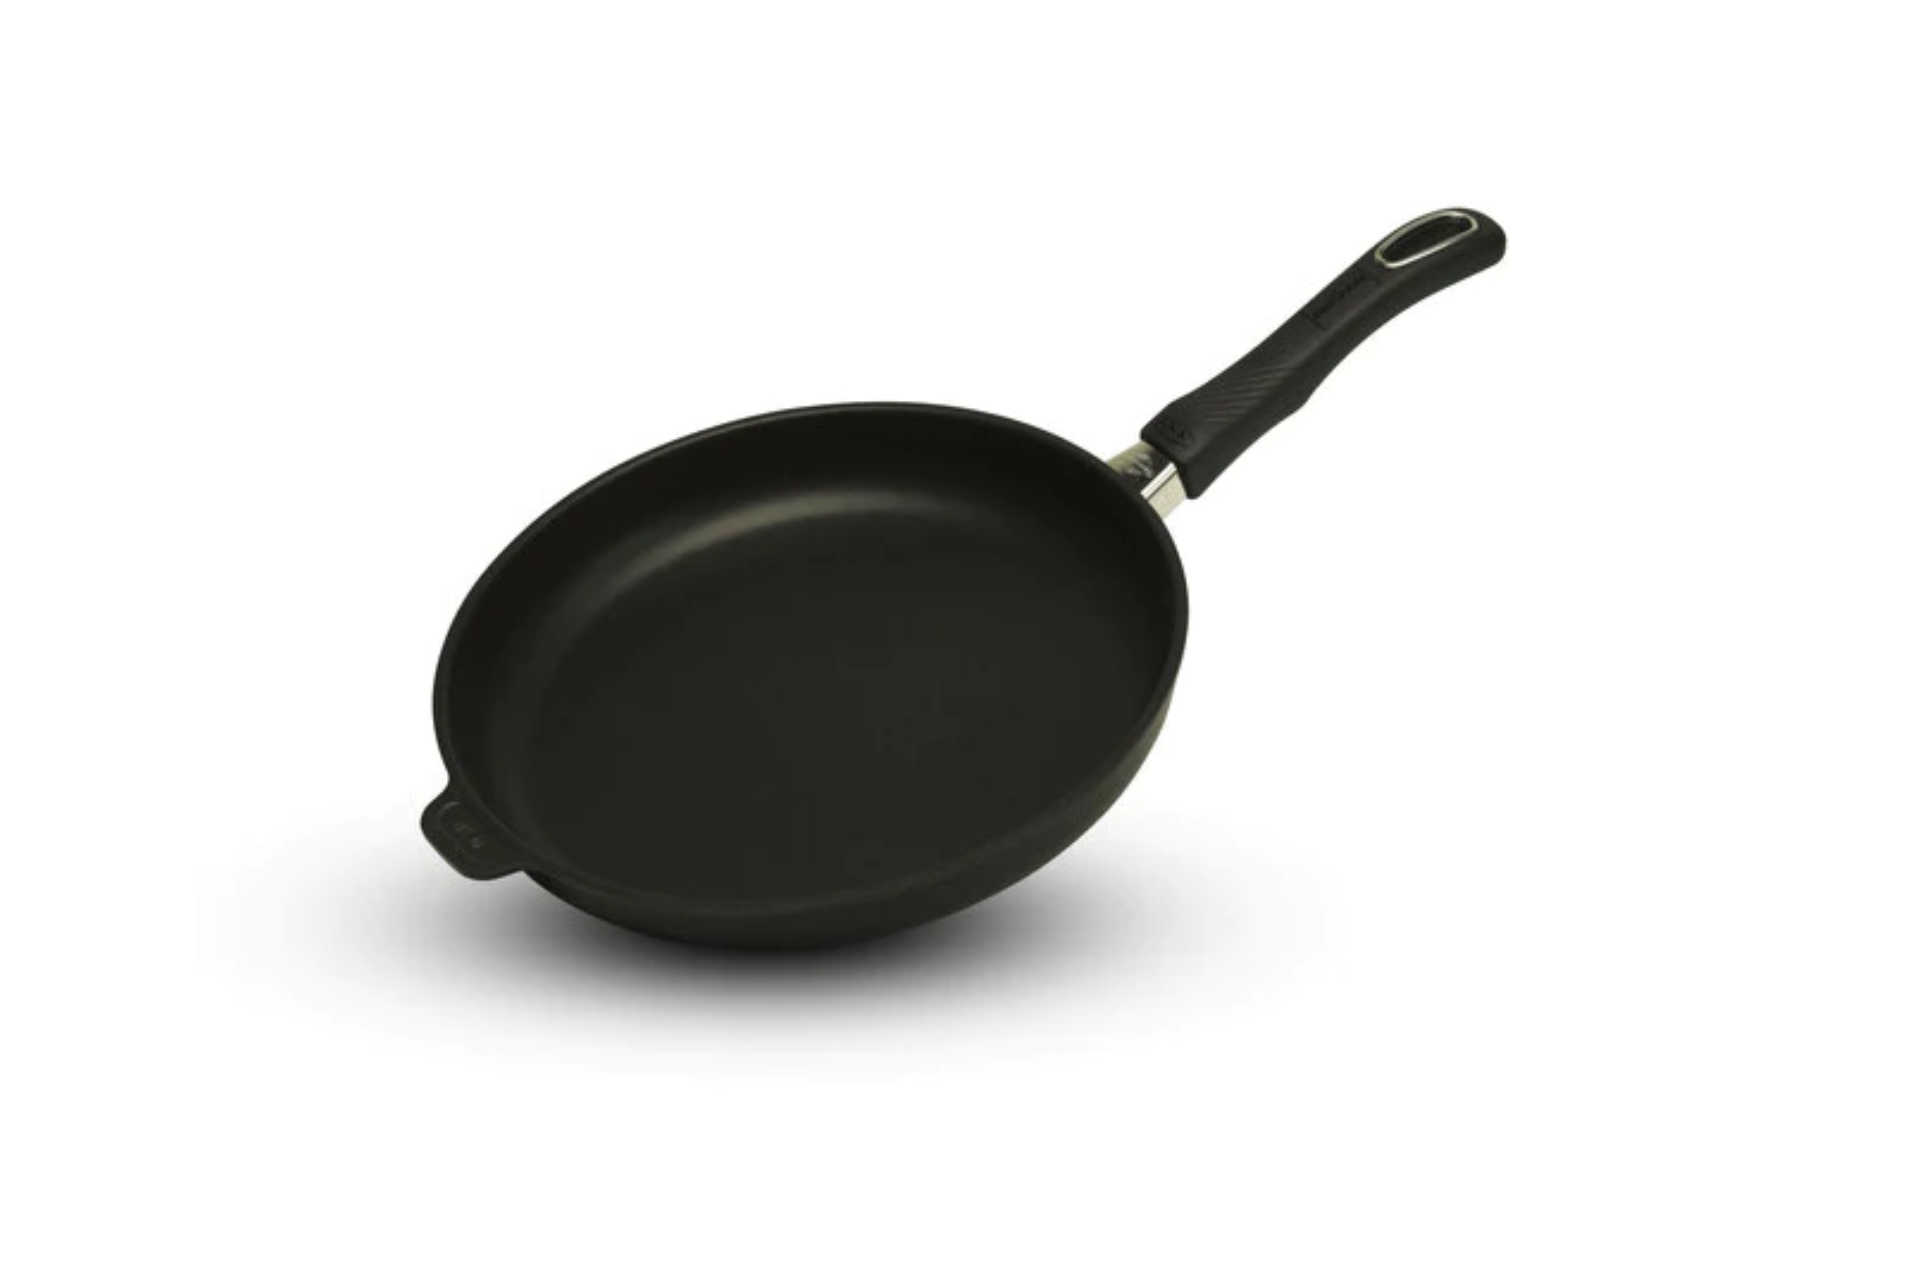 The Gastrolux 28cm Induction Frying Pan